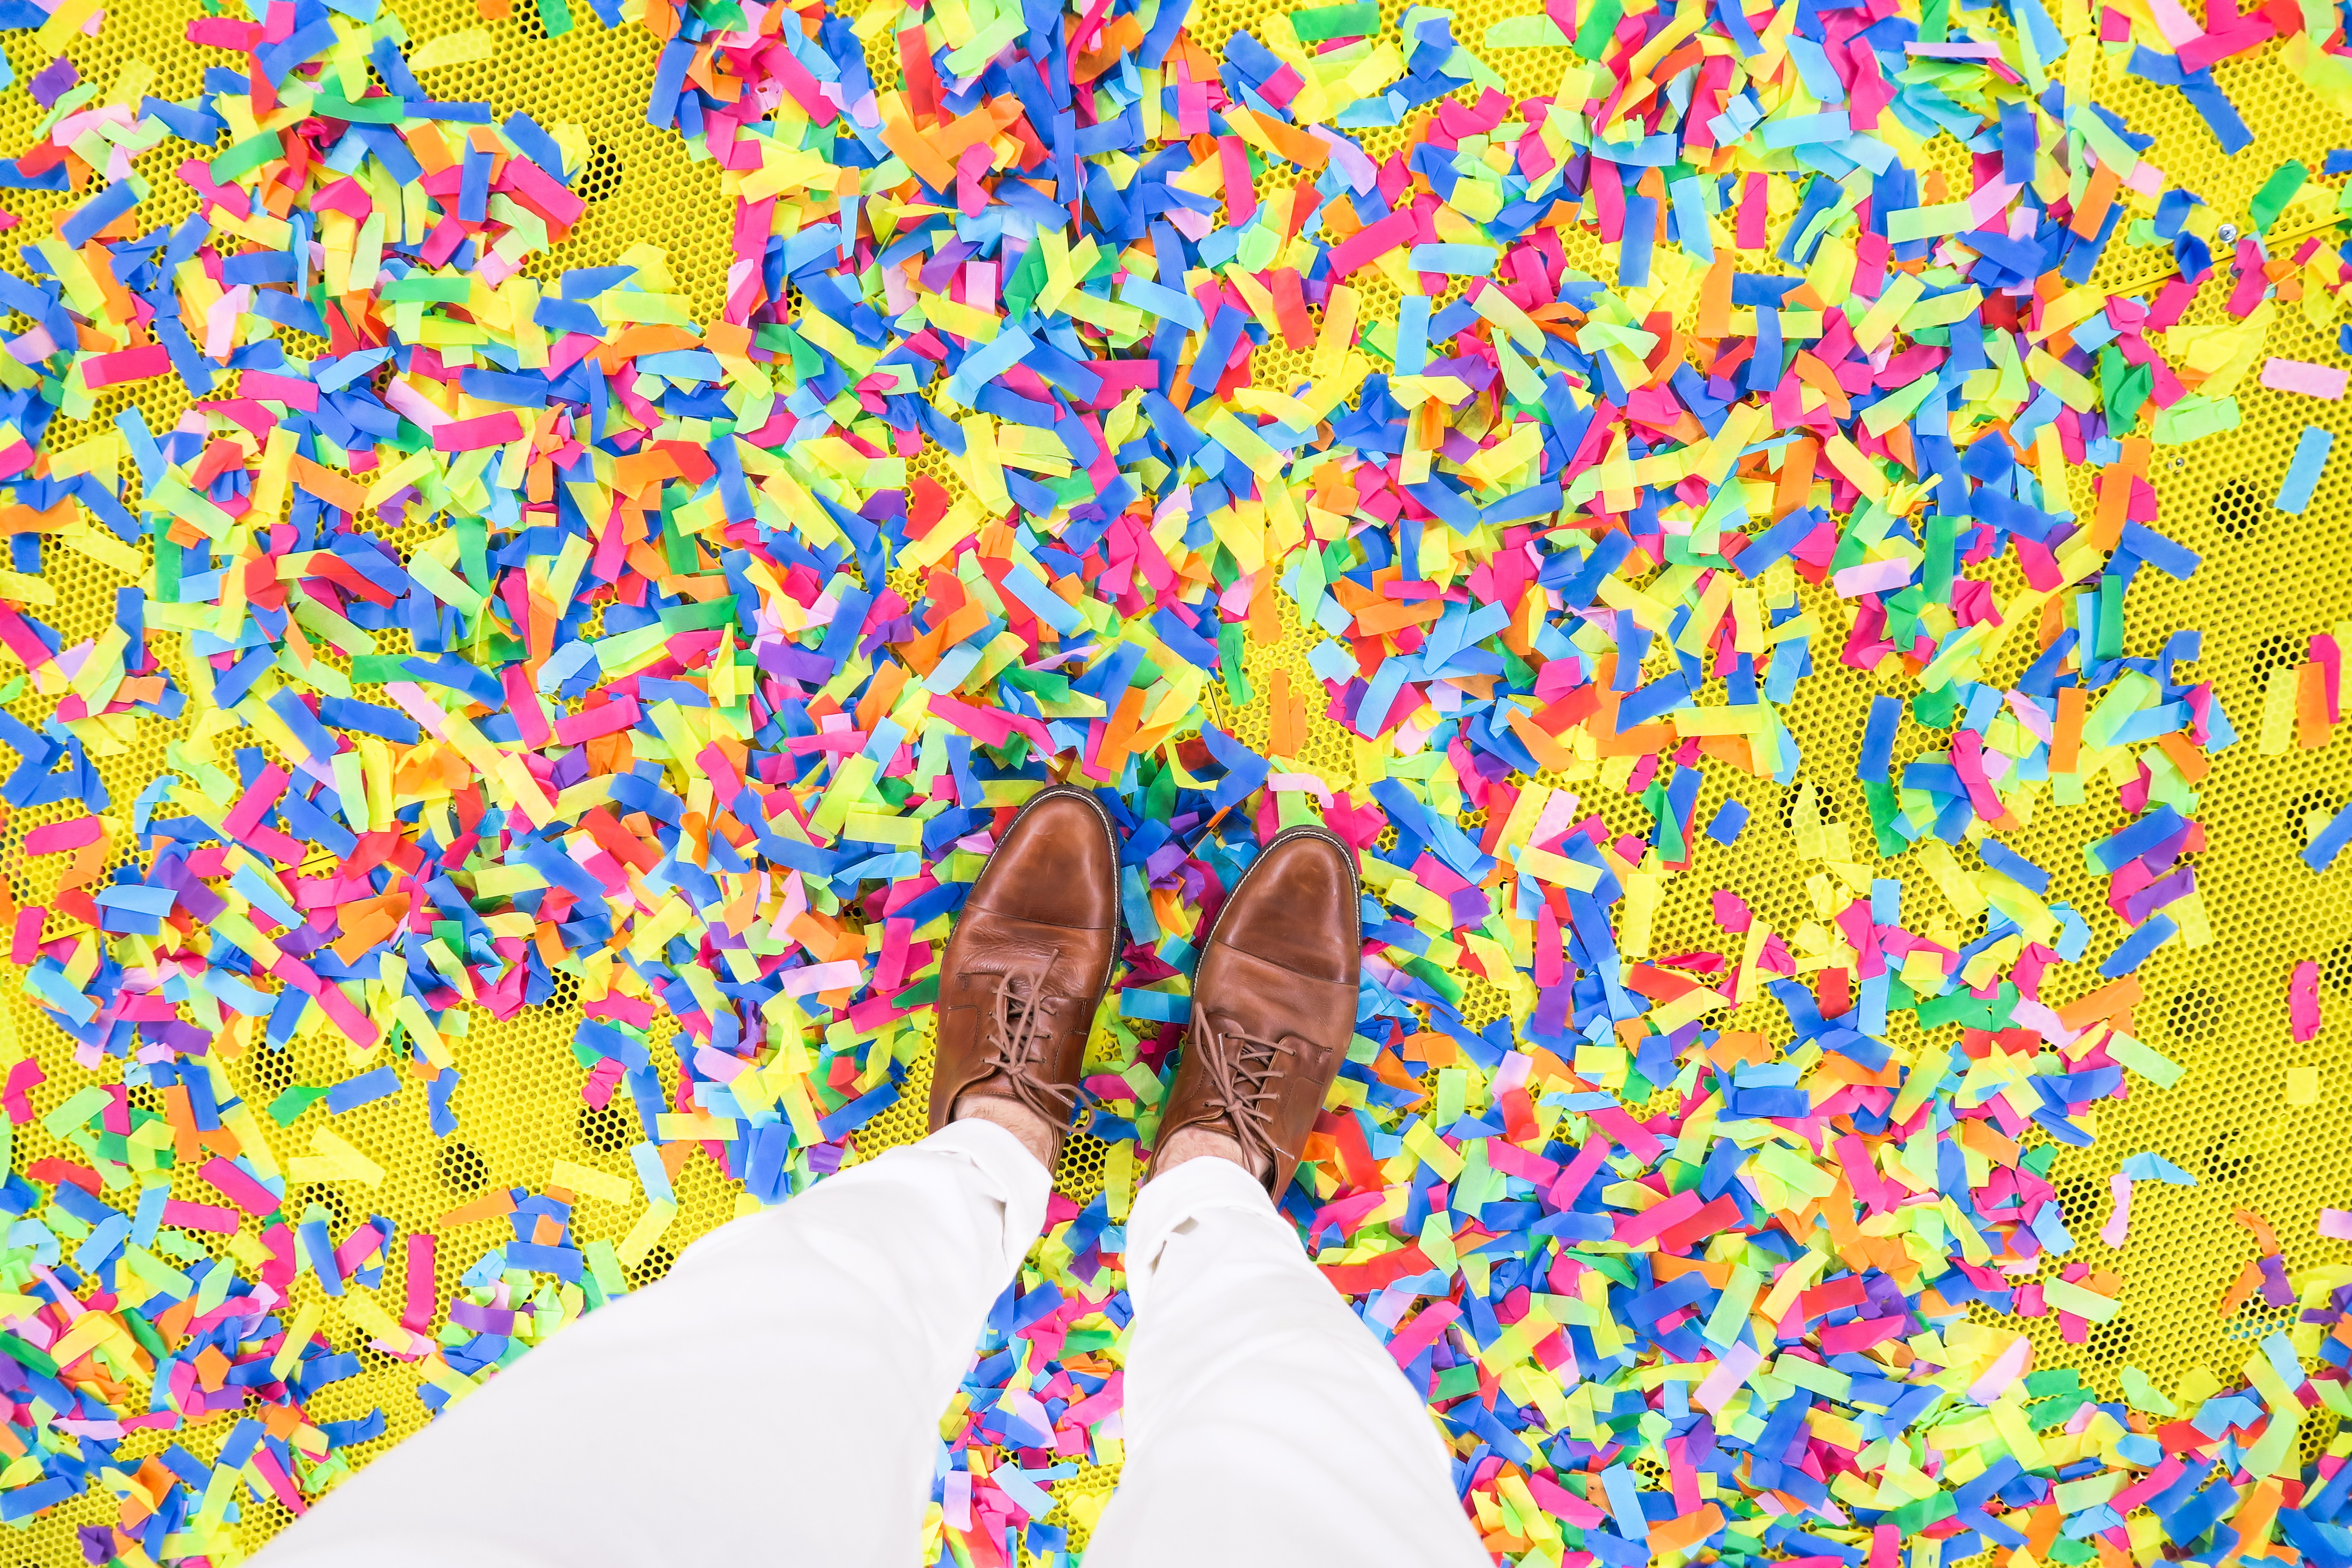 Pant legs and men's dress shoes standing on colored confetti